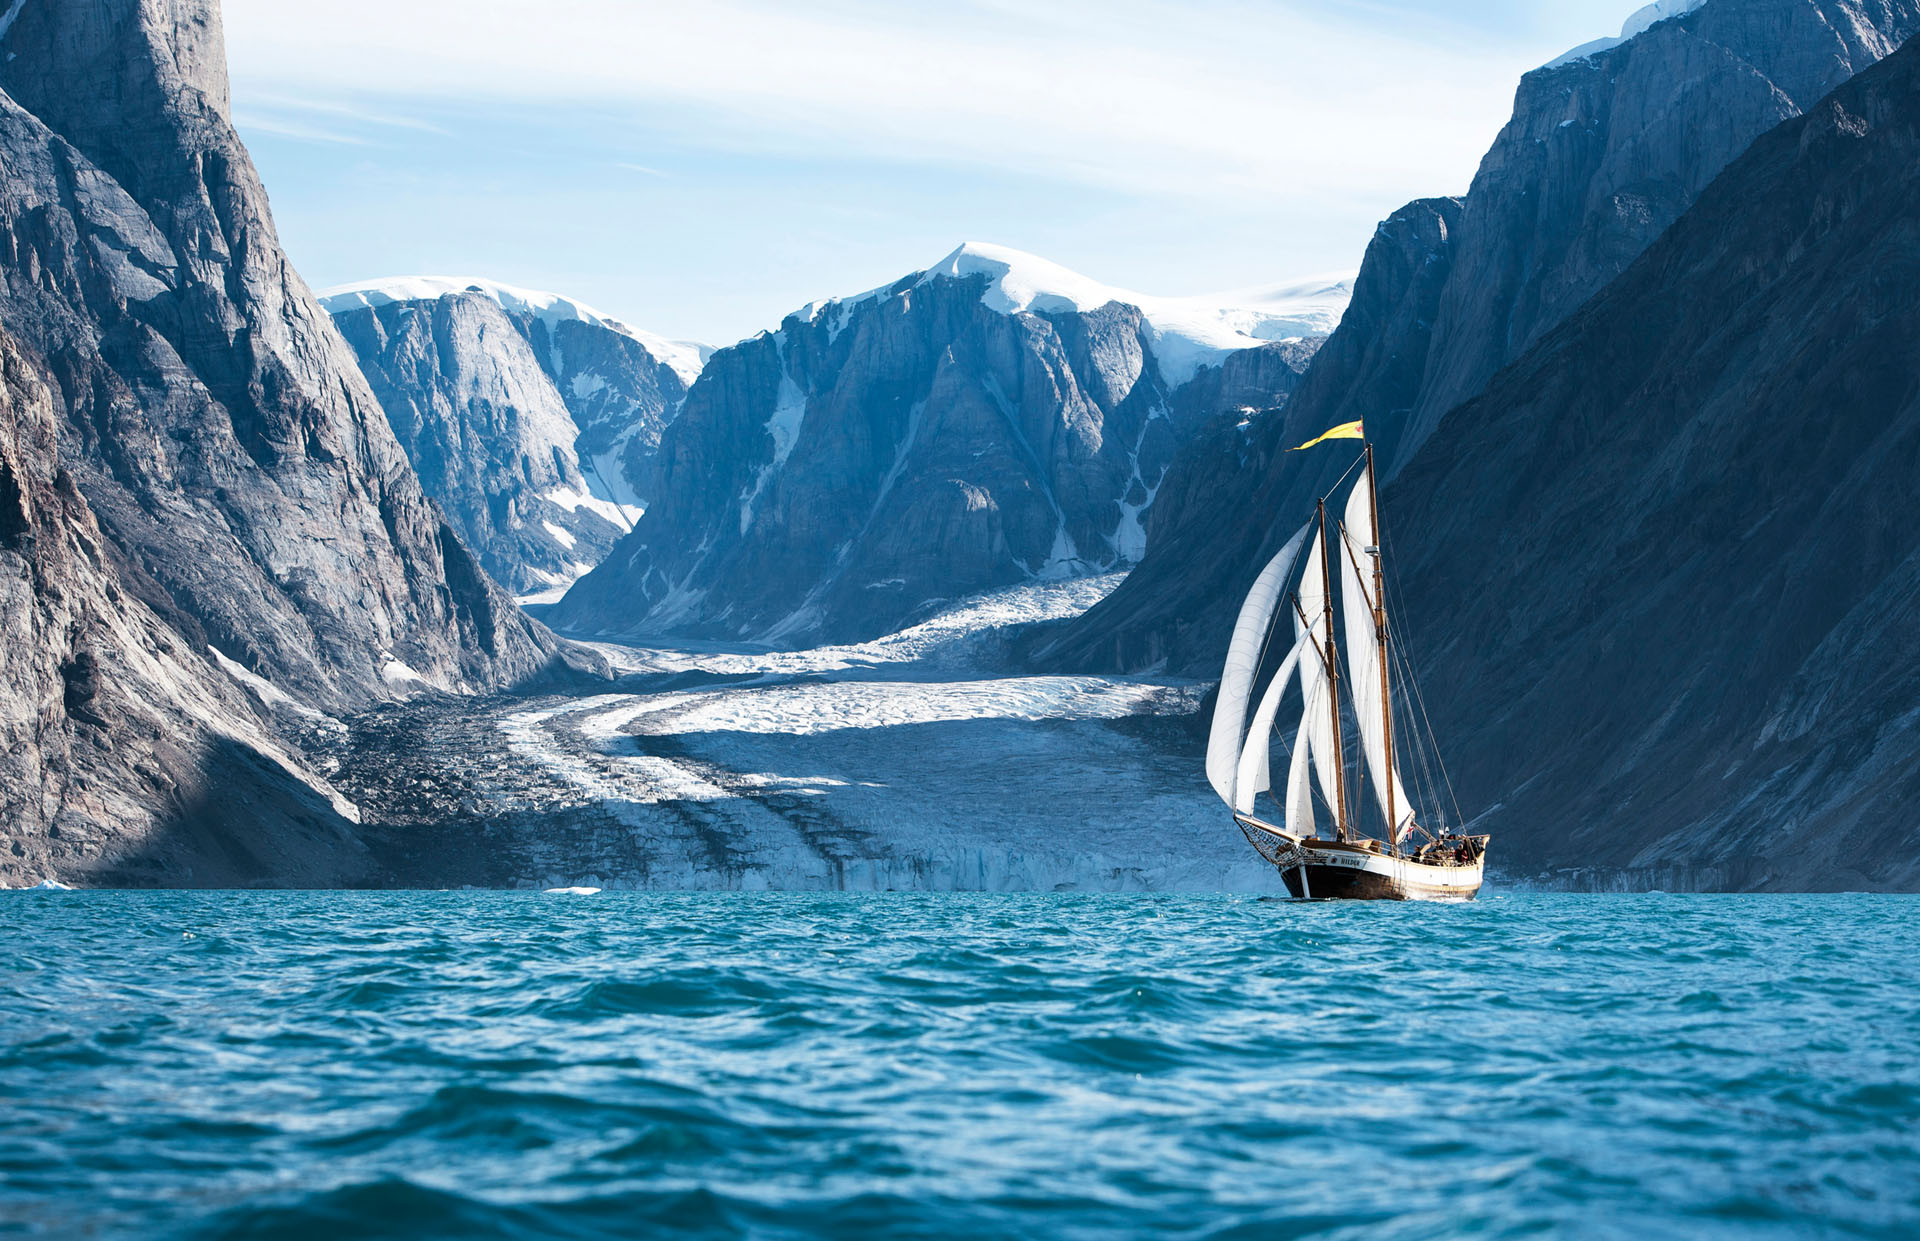 greenland sailing holiday: experience east greenland in 7 days